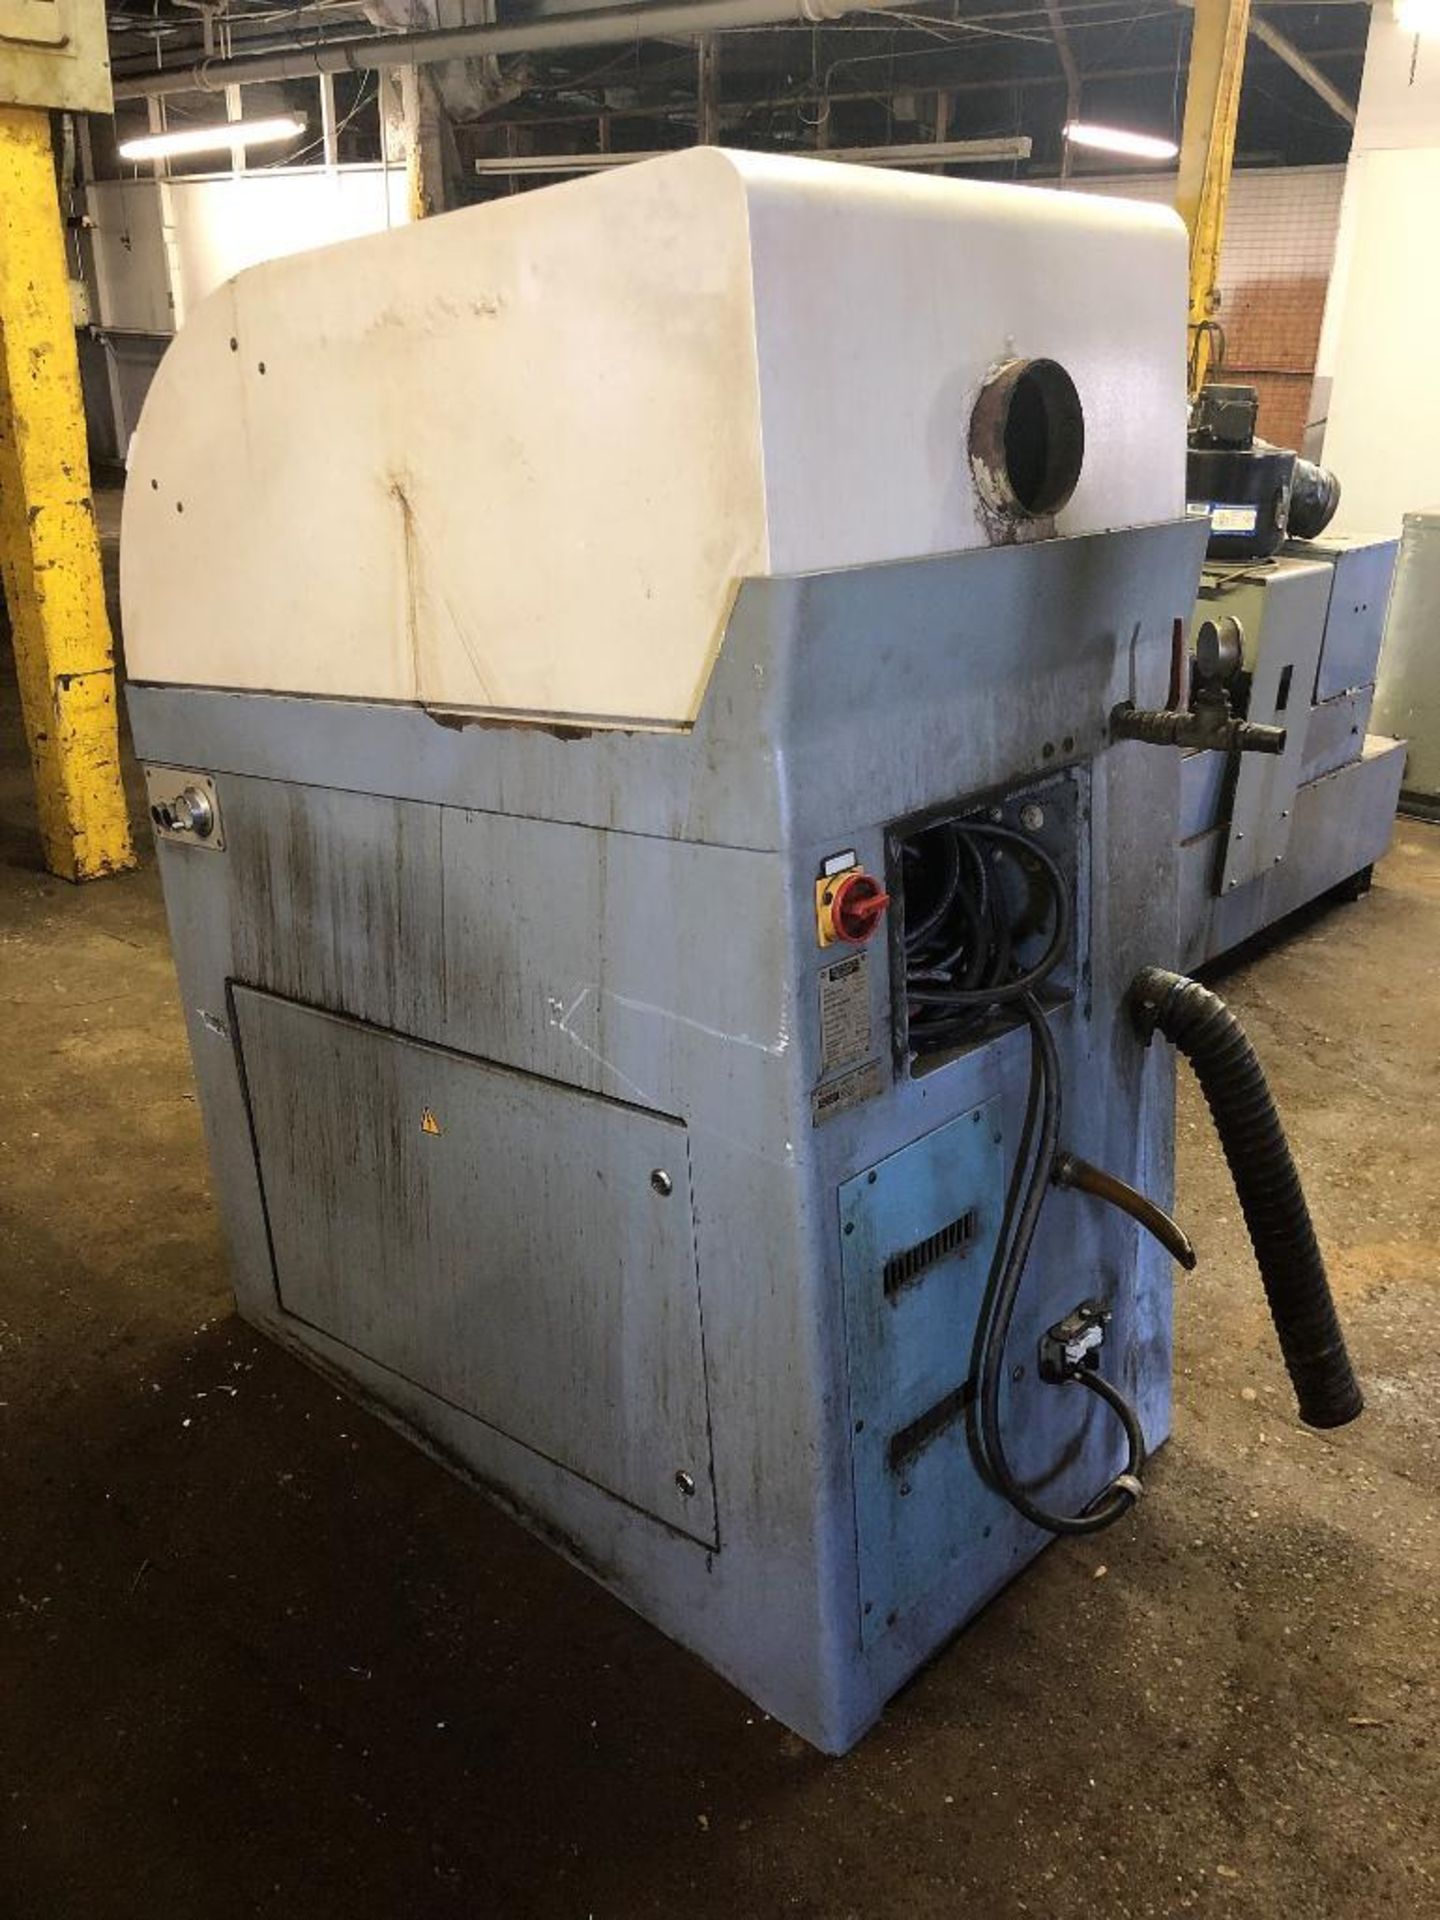 Schmidt Tempo ECE 45 Saw Blade Grinding Machine S/N: 24-371 (2002) 220V24V/25A; Dimensions 44"x 42"x - Image 3 of 17